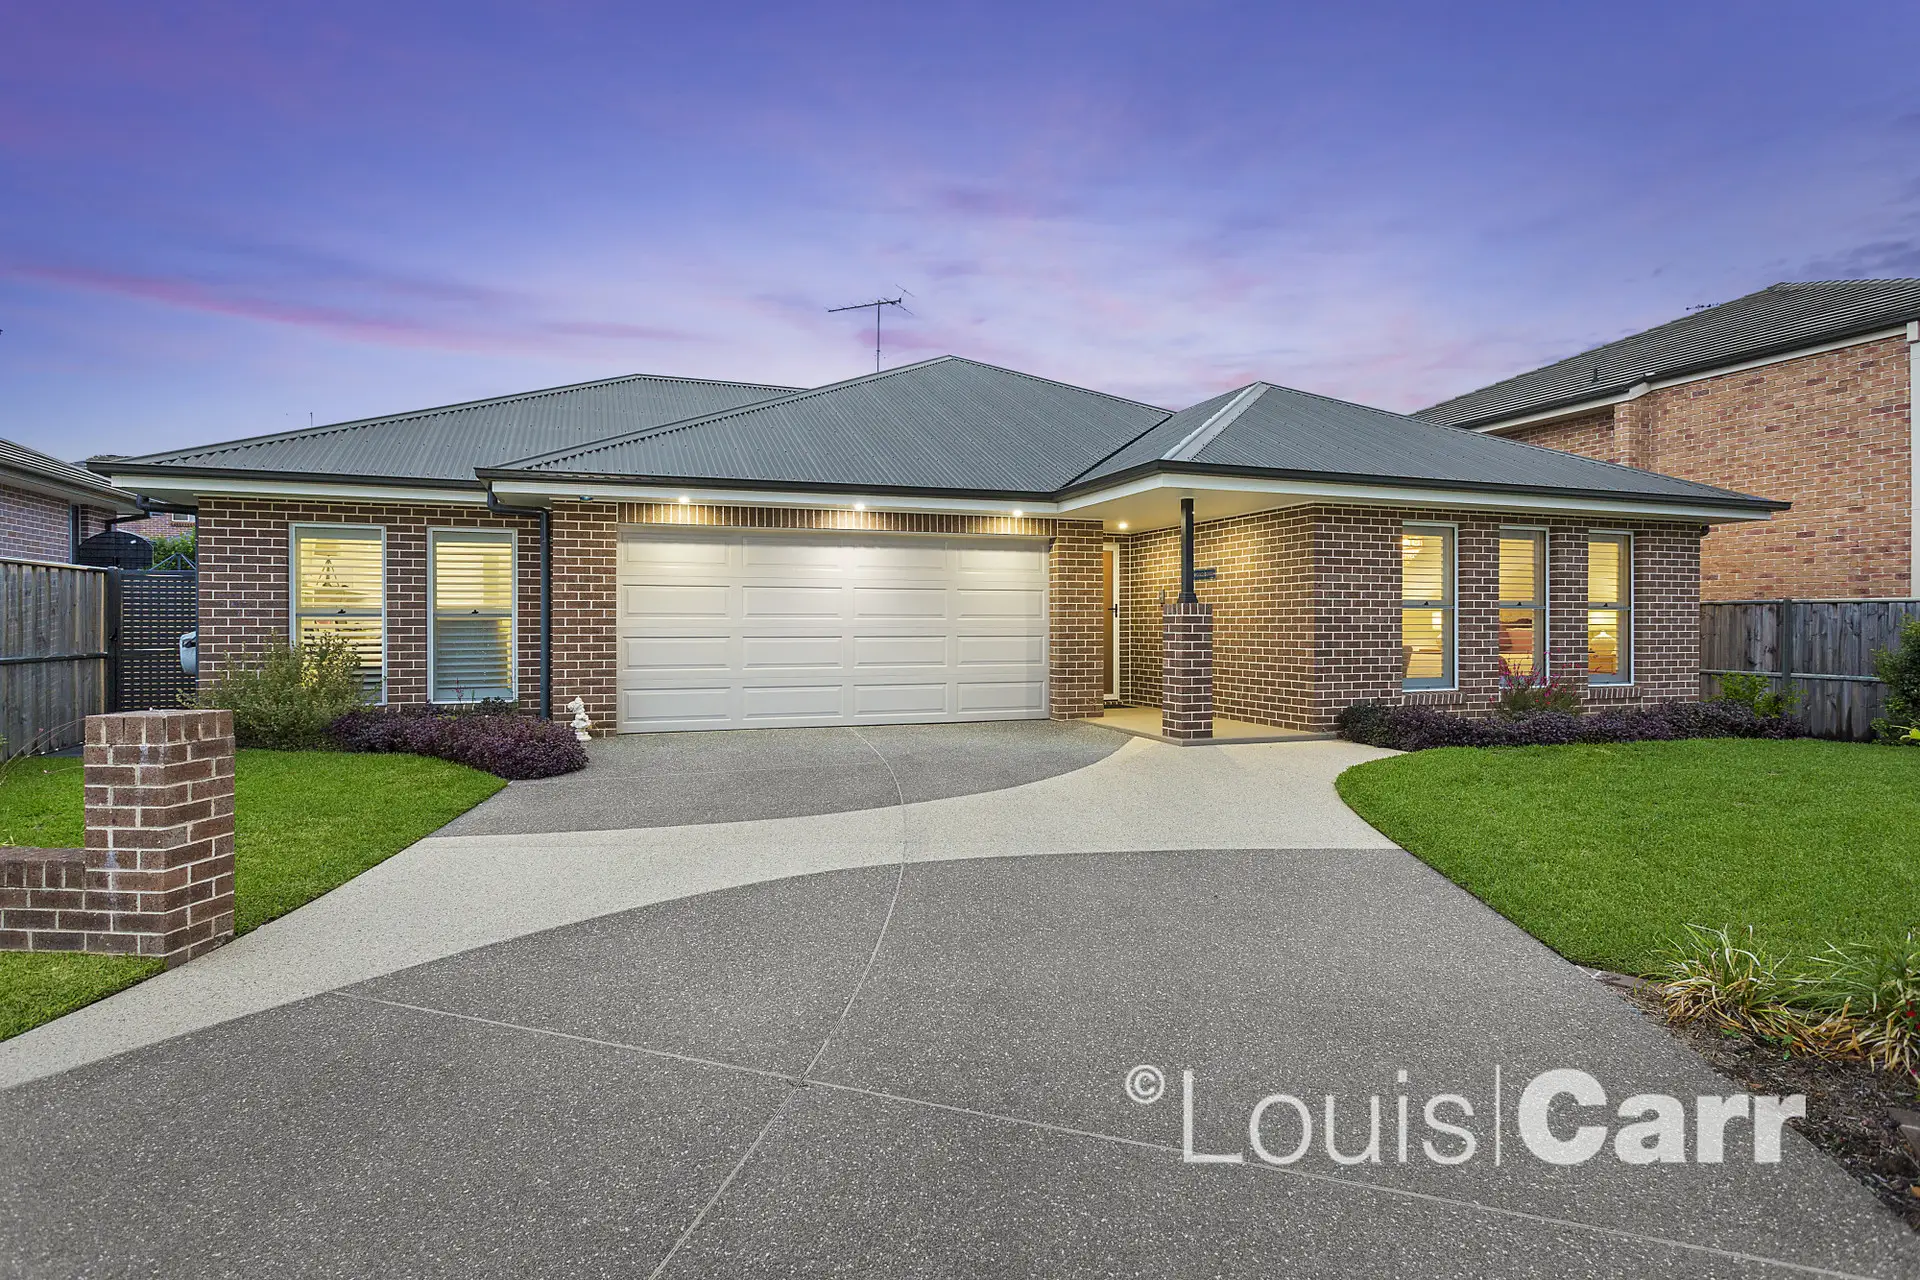 Photo #1: 9 Galvin Avenue, Kellyville - Sold by Louis Carr Real Estate